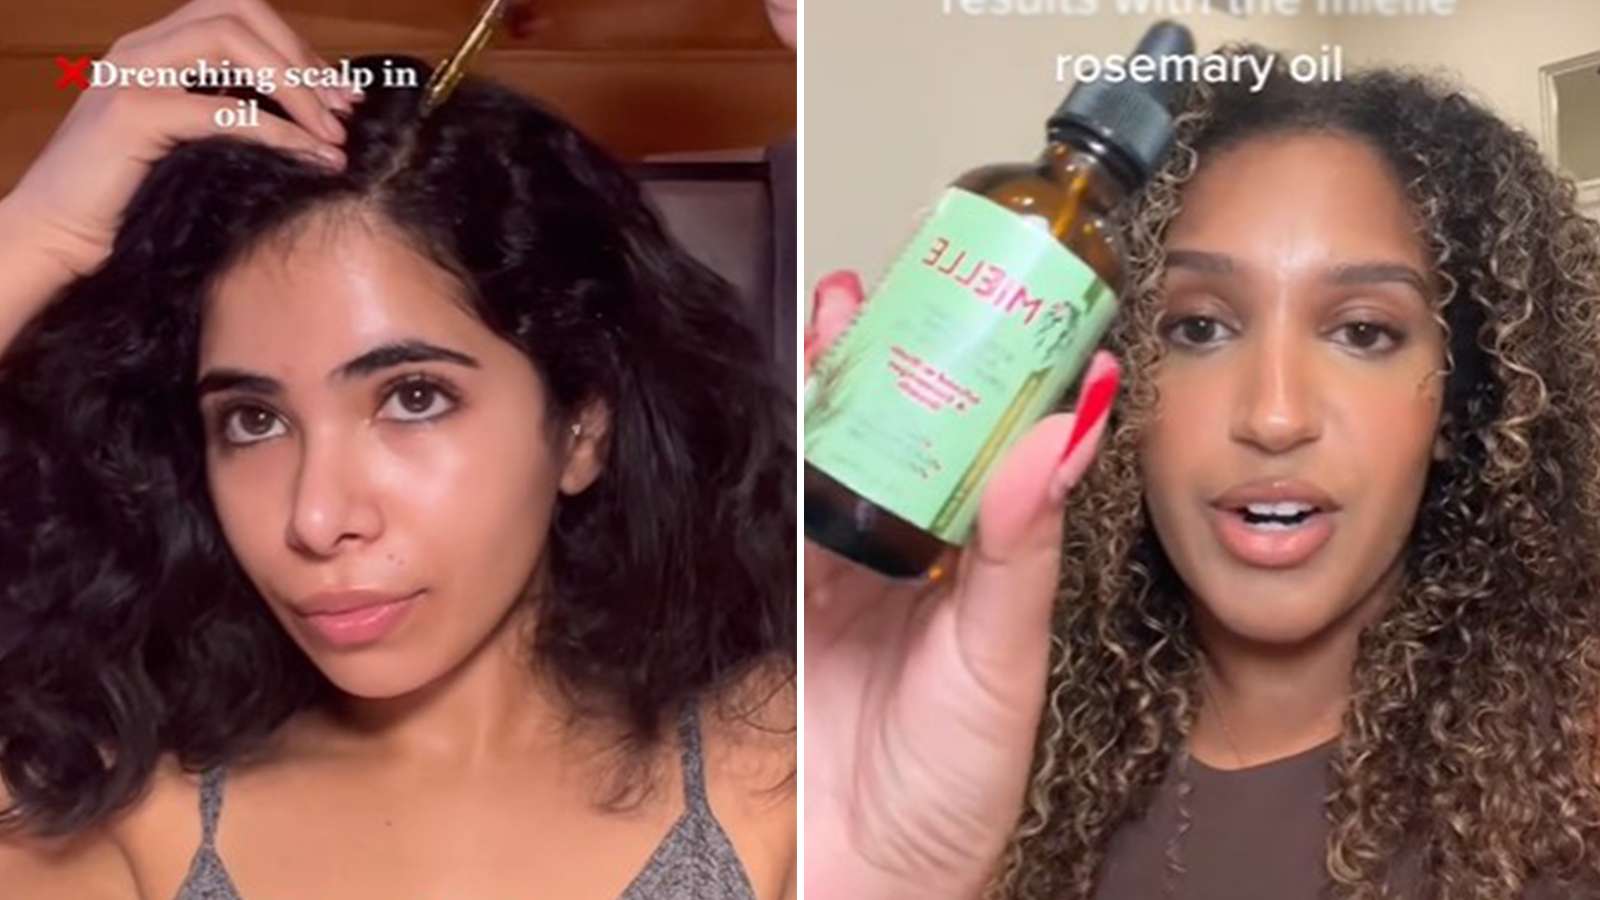 what-is-tiktok-rosemary-oil-hair-growth-trend